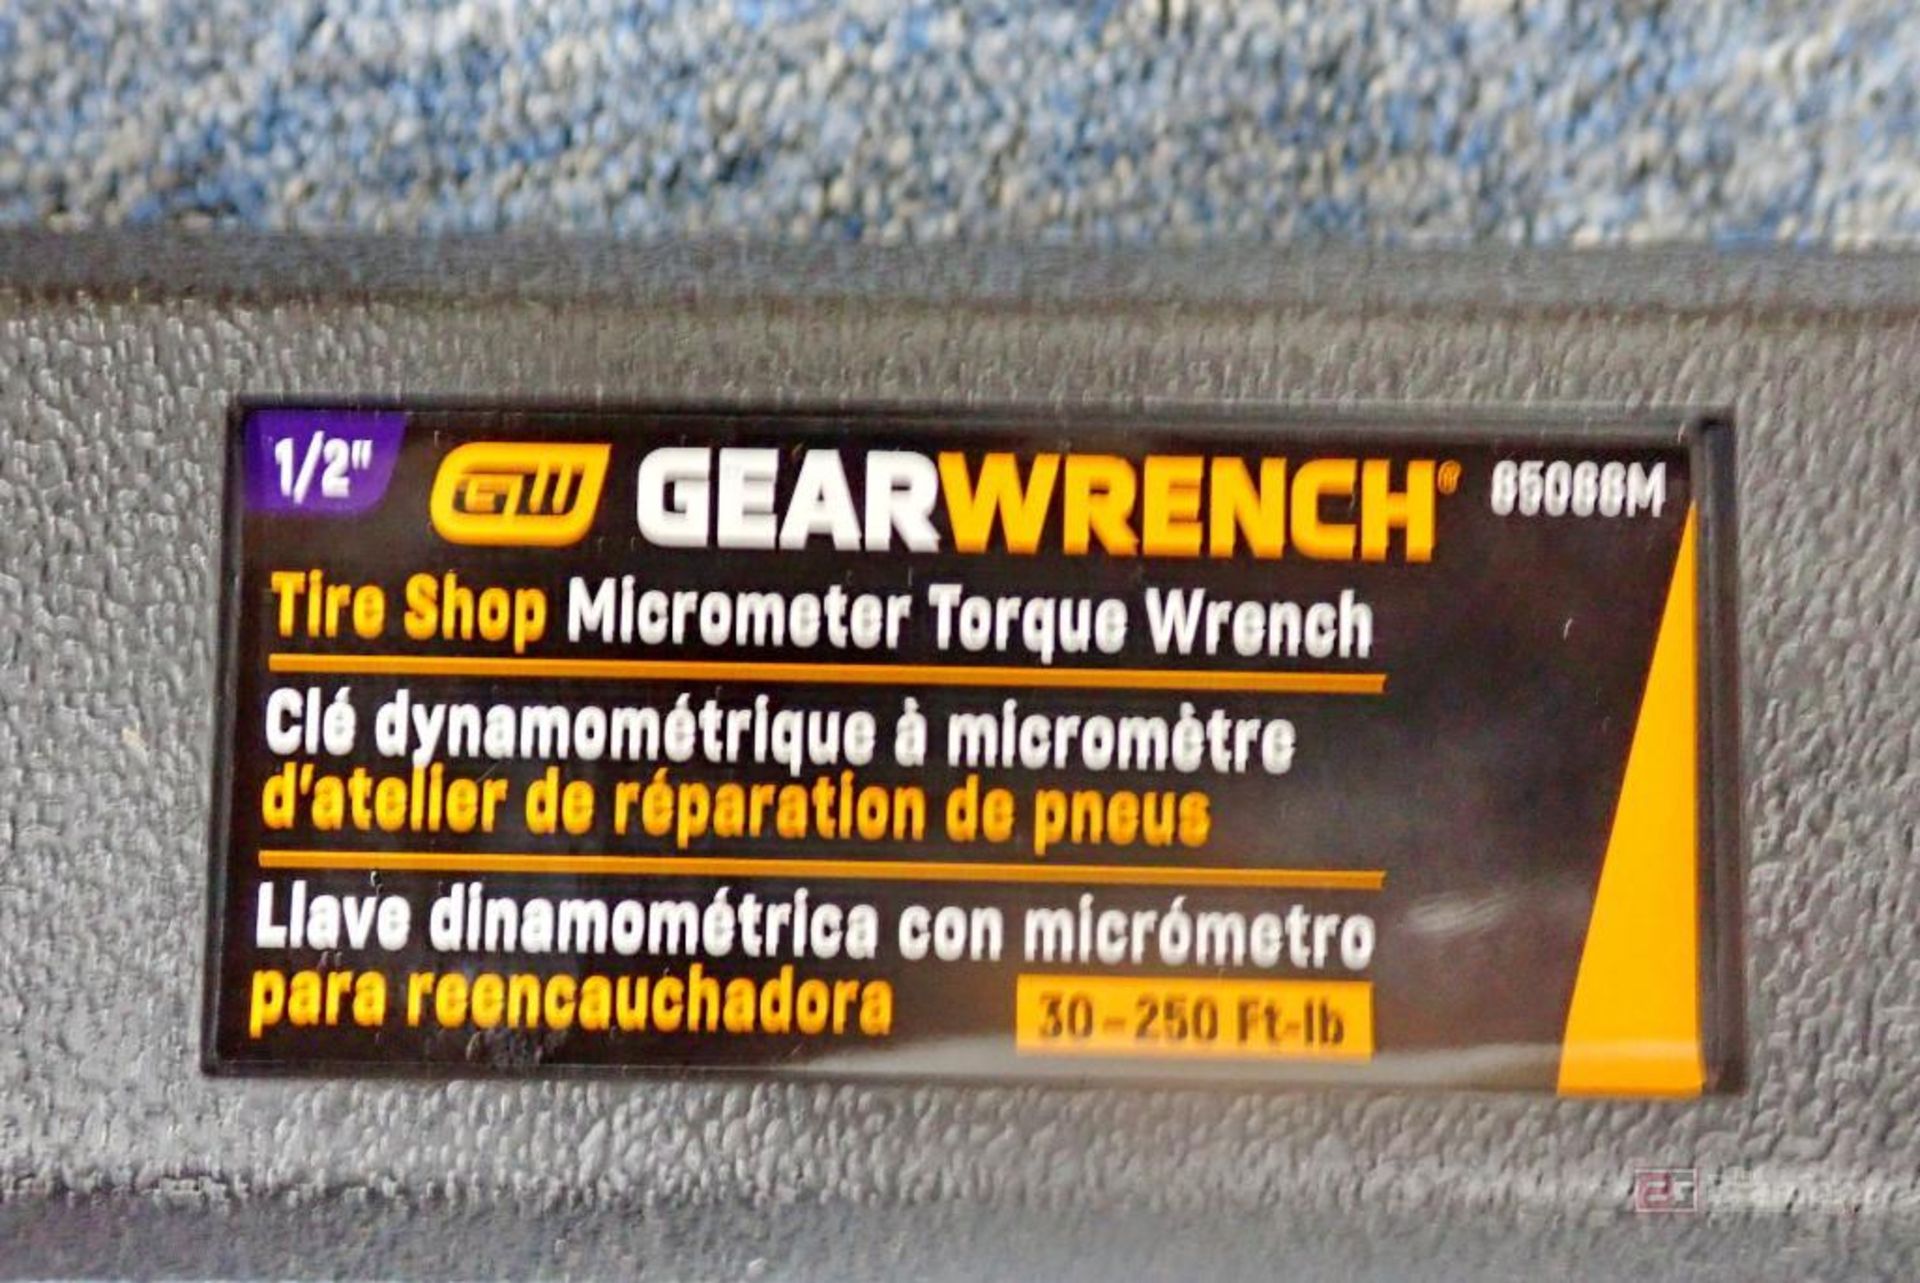 GearWrench 85088M (8612115) 1/2" Drive Tire Shop Micrometer Torque Wrench - Image 2 of 4